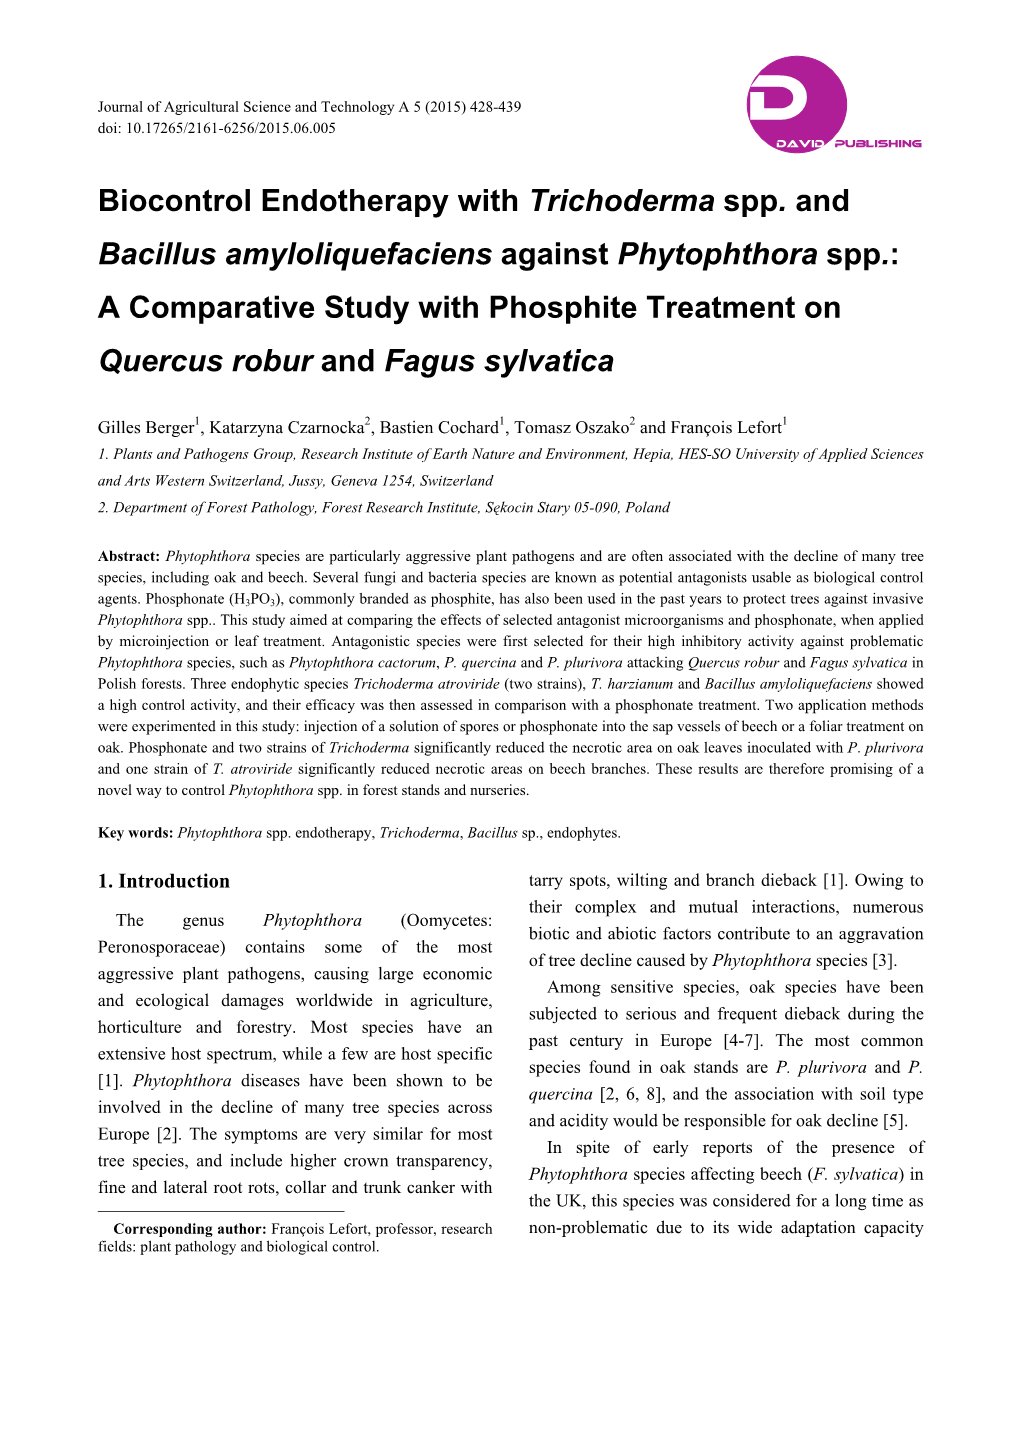 Biocontrol Endotherapy with Trichoderma Spp. and Bacillus Amyloliquefaciens Against Phytophthora Spp